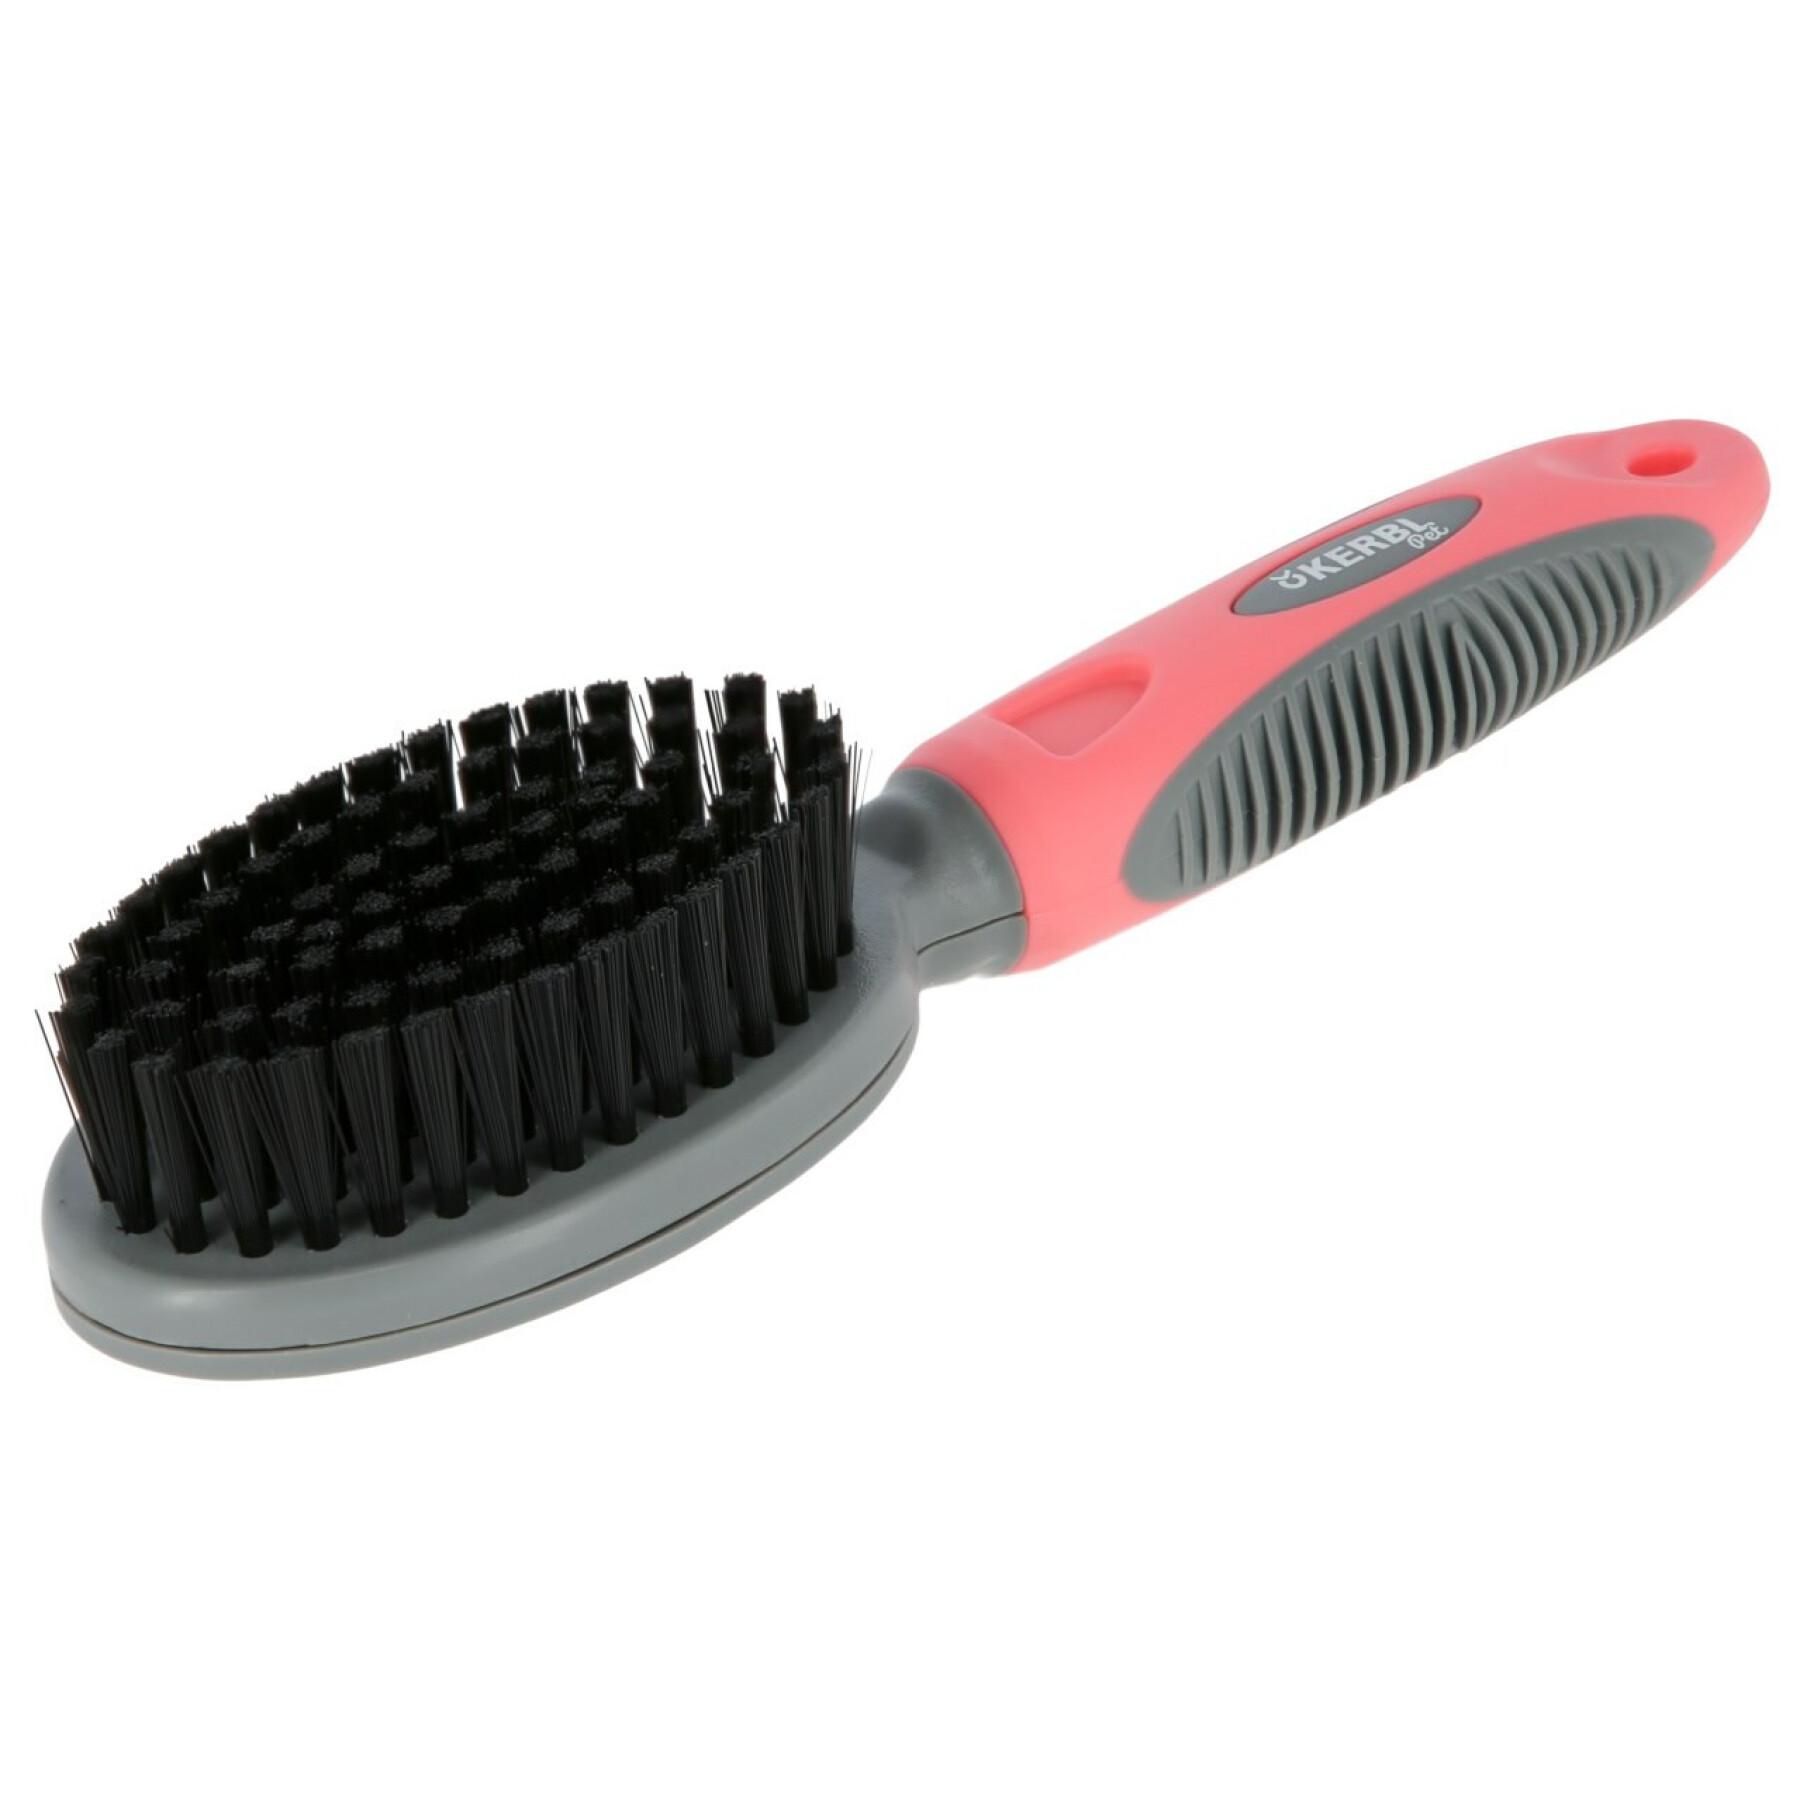 Soft brush for cats Kerbl